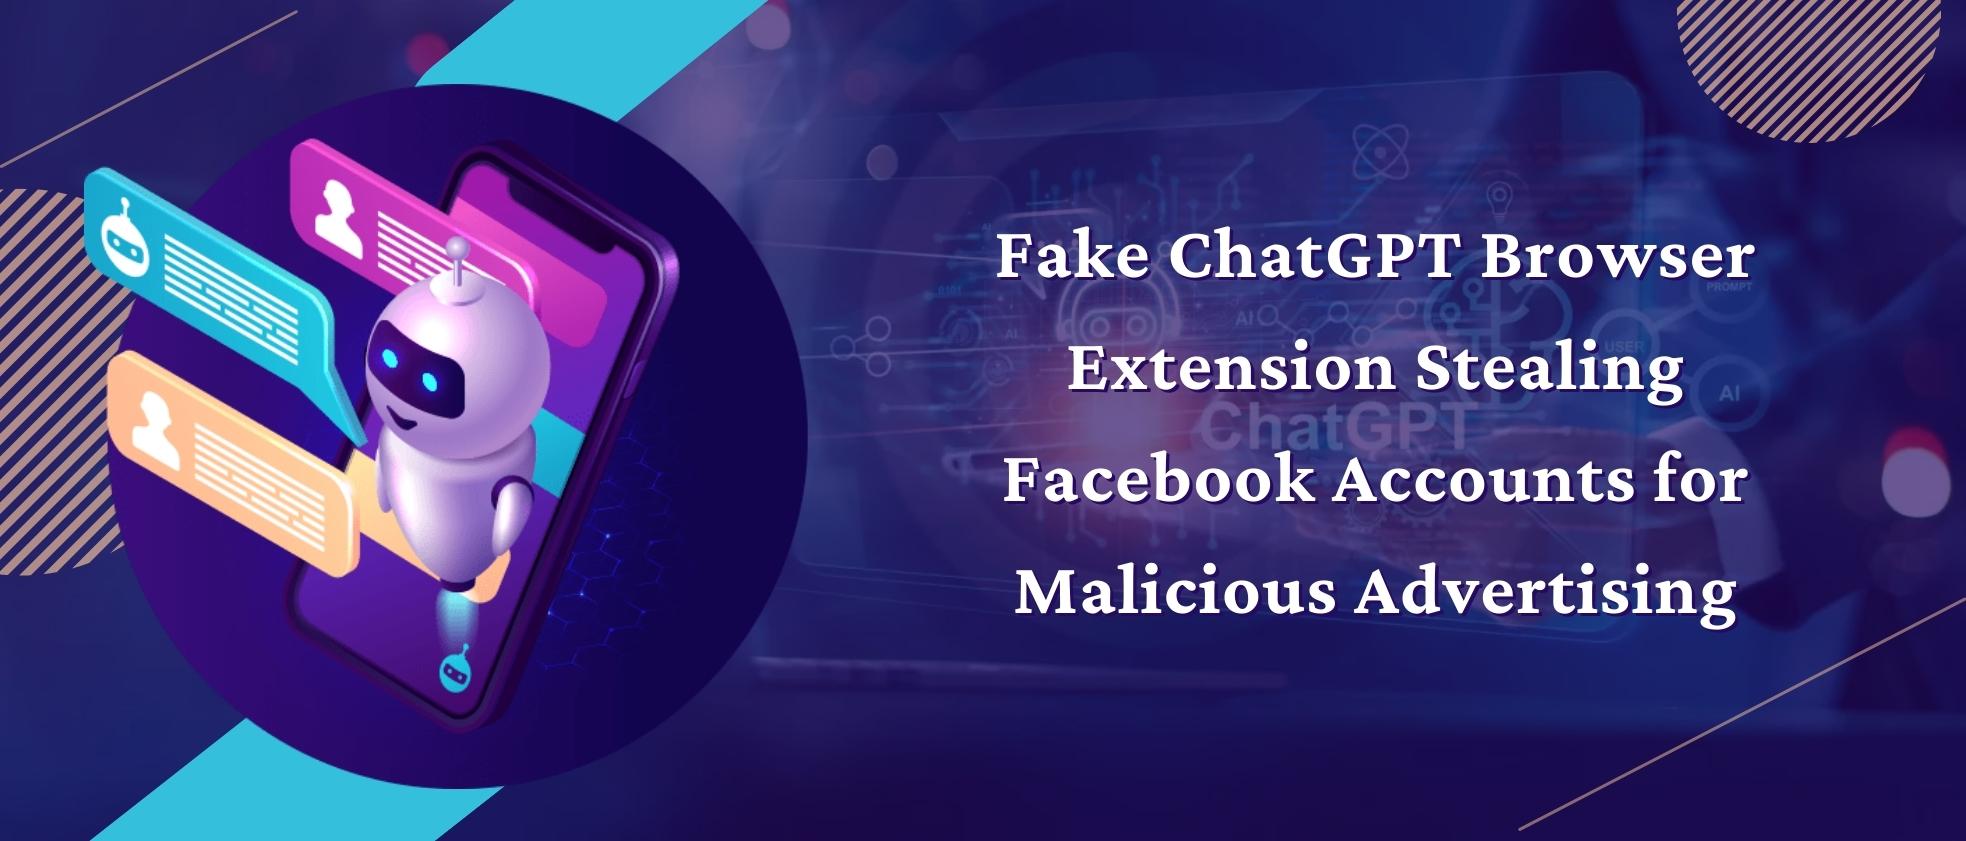 Fake ChatGPT Browser Extension Stealing Facebook Accounts for Malicious Advertising